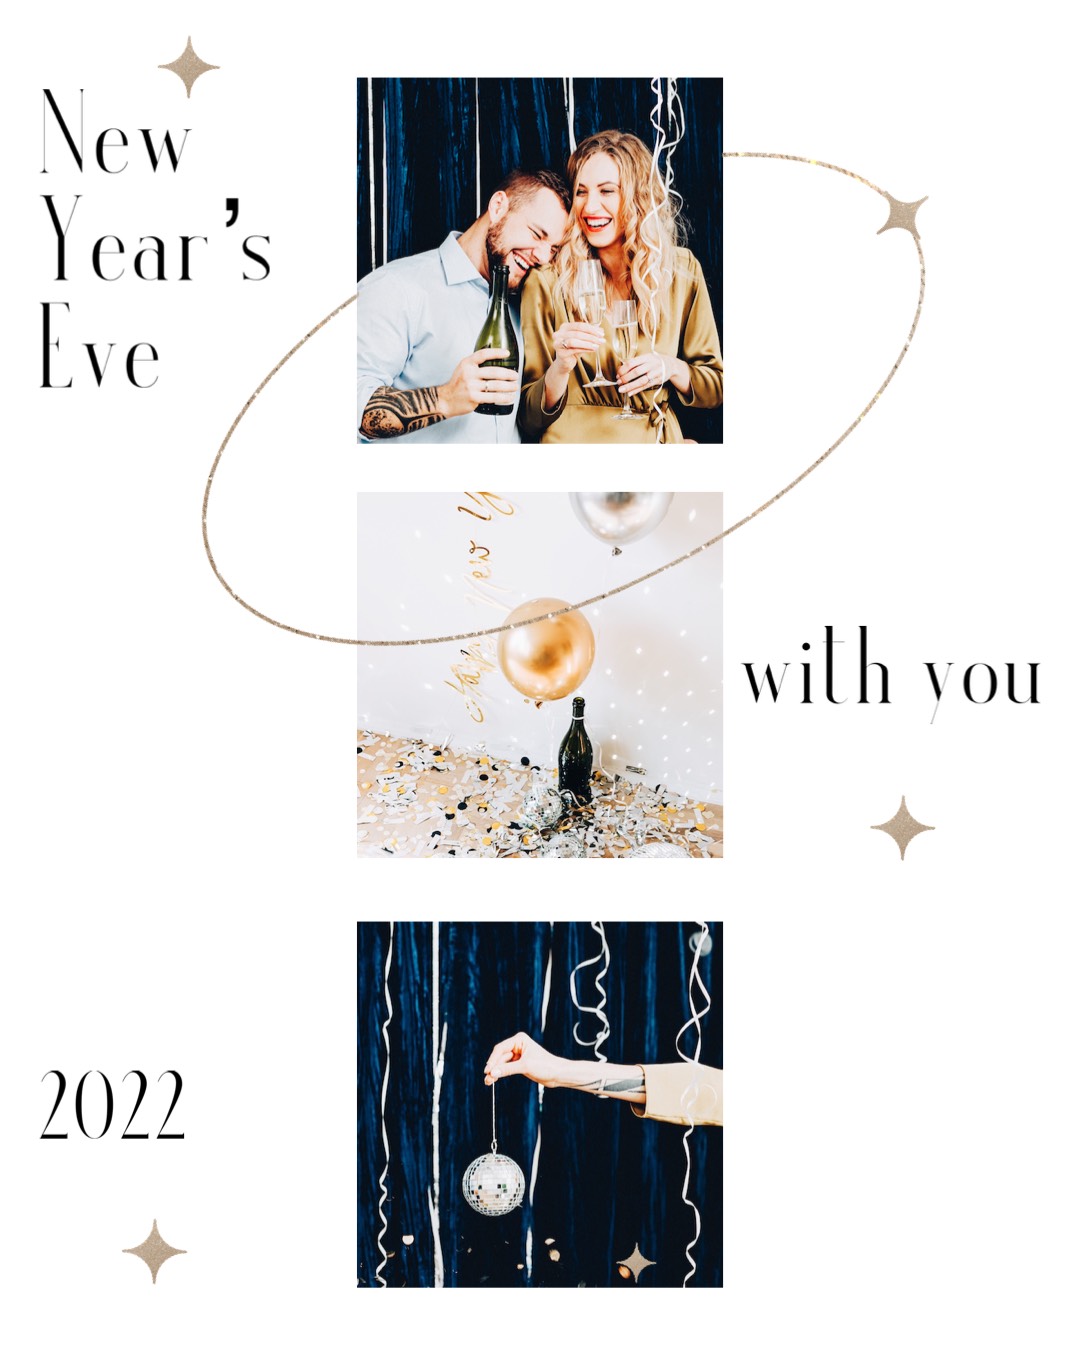 New year's eve with champagne, balloons and disco ball Happy New Year template